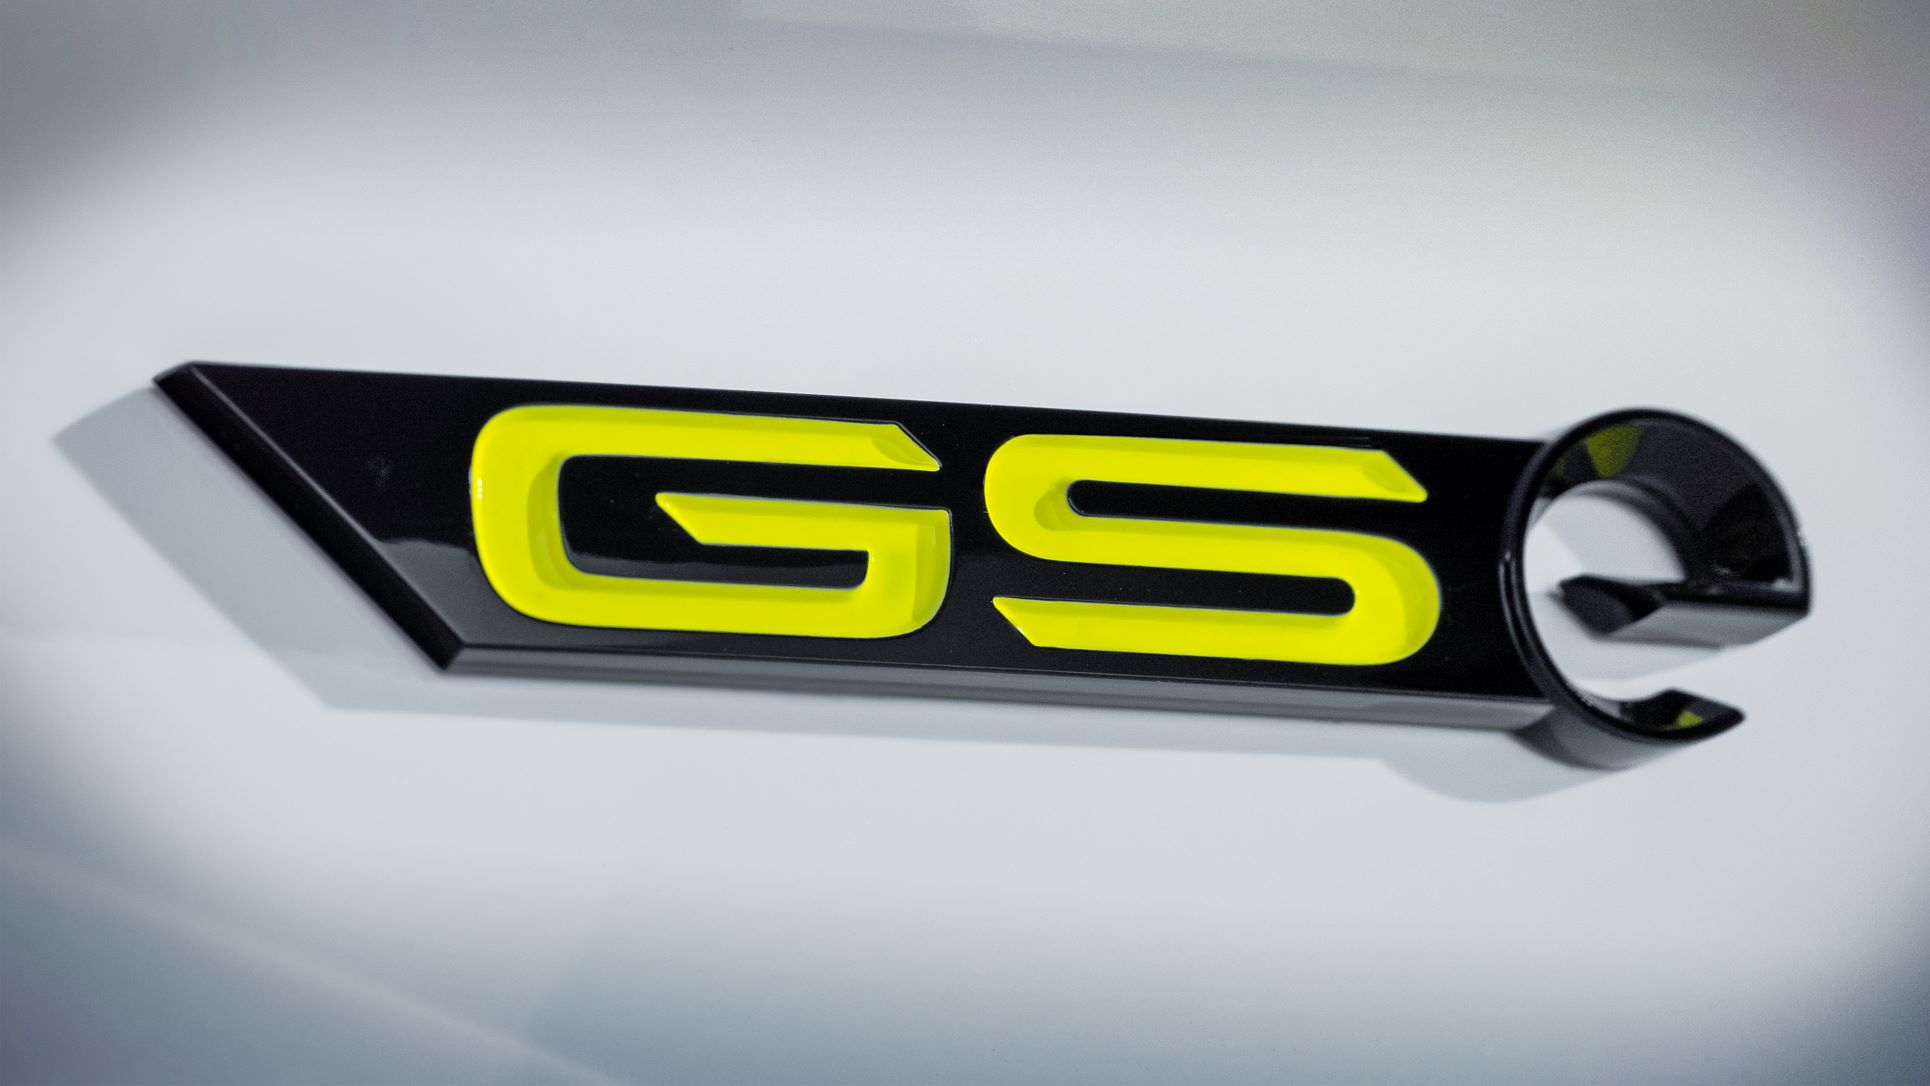 Opel GSe or 'Grand Sport Electric' badging